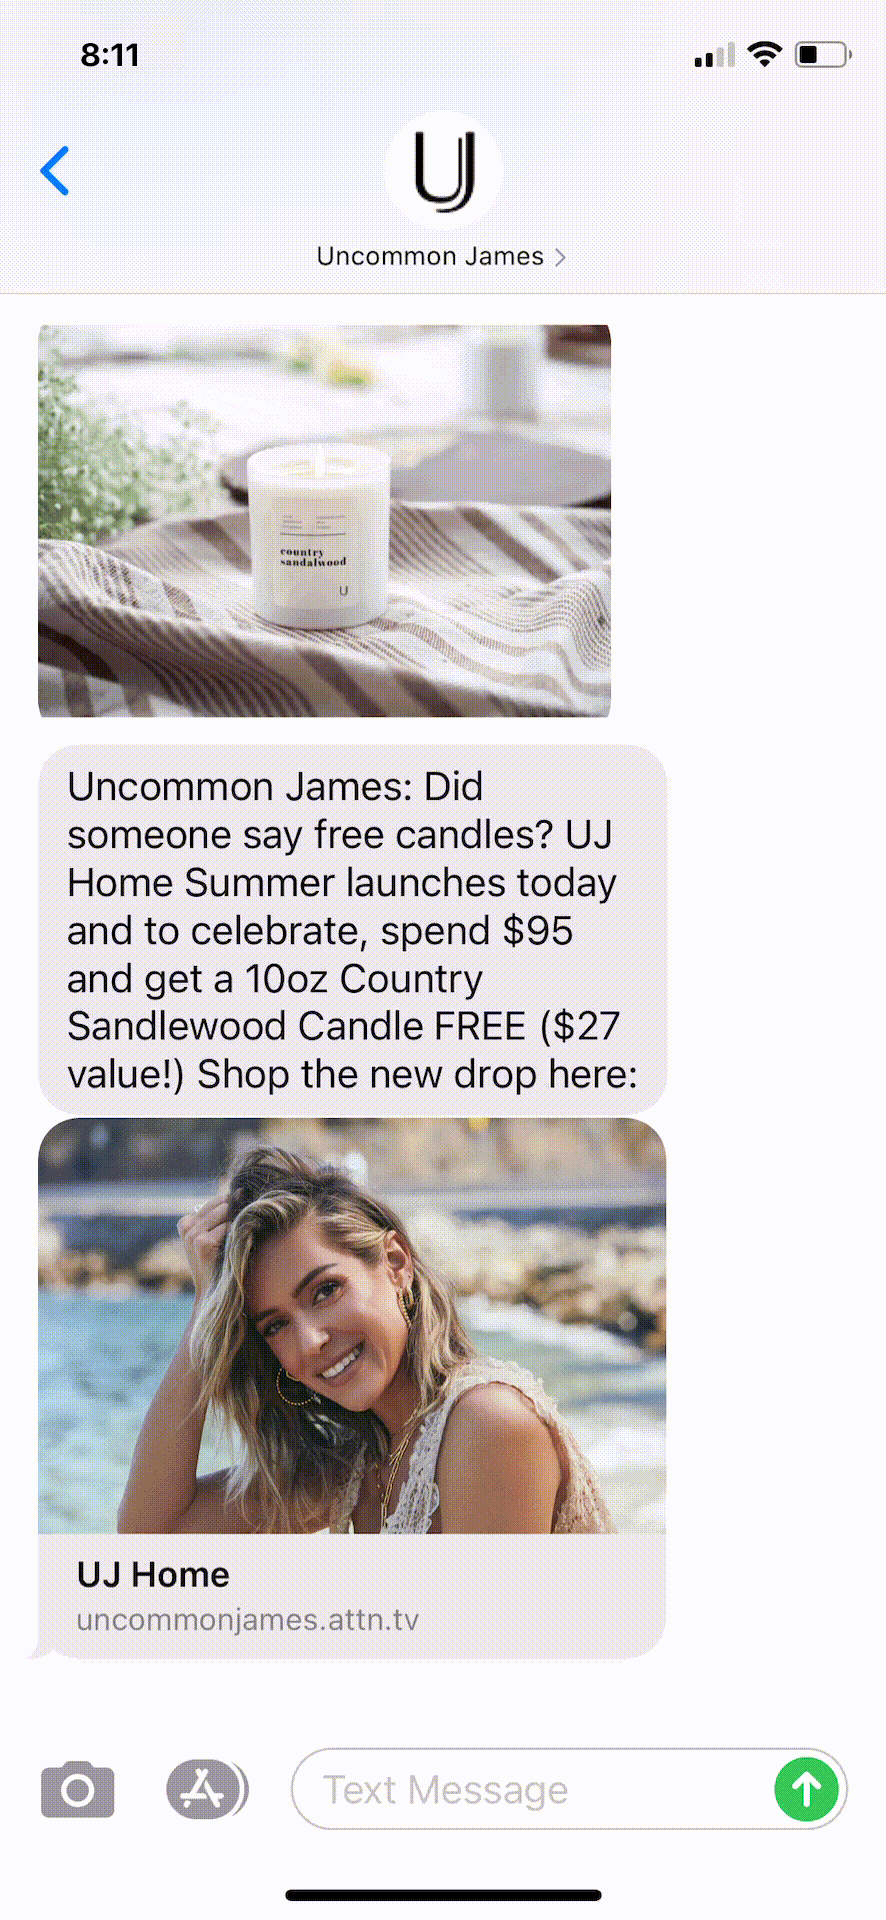 Uncommon-James-Text-Message-Marketing-Example-06.03.2021